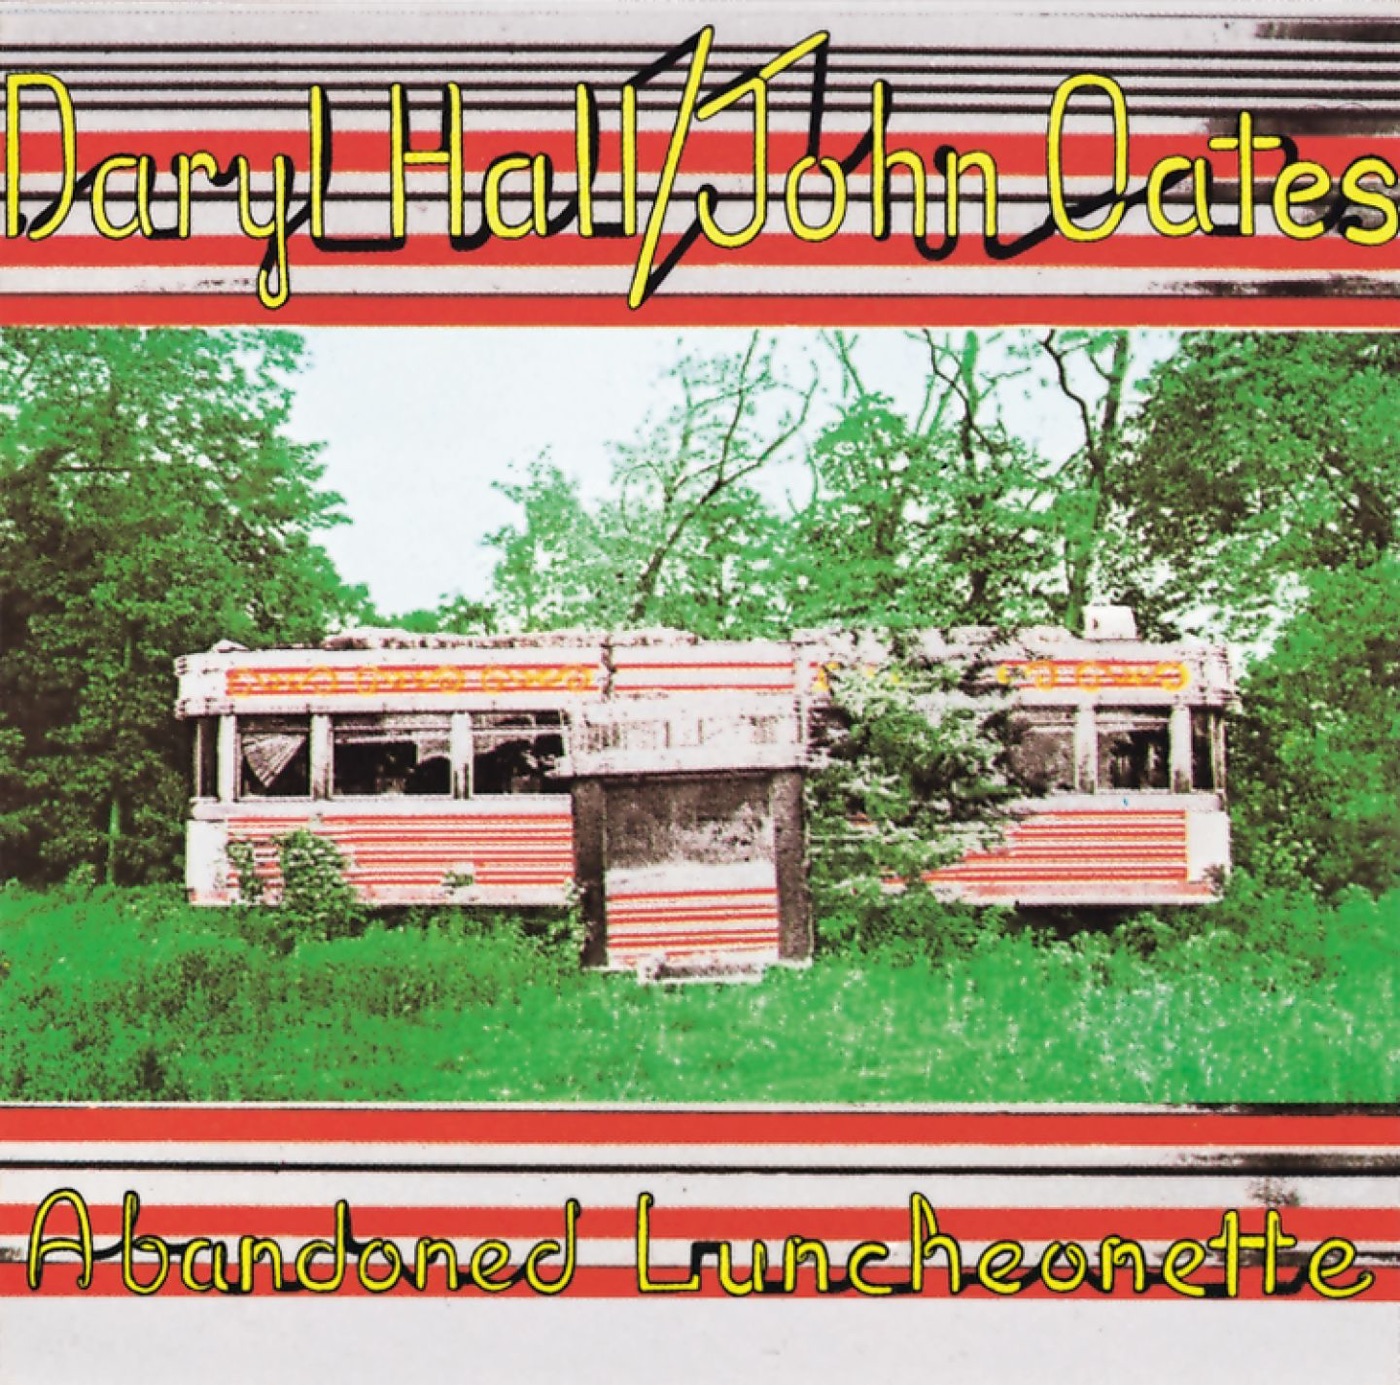 Abandoned Luncheonette by Daryl Hall & John Oates, Daryl Hall & John Oates (1), Daryl Hall